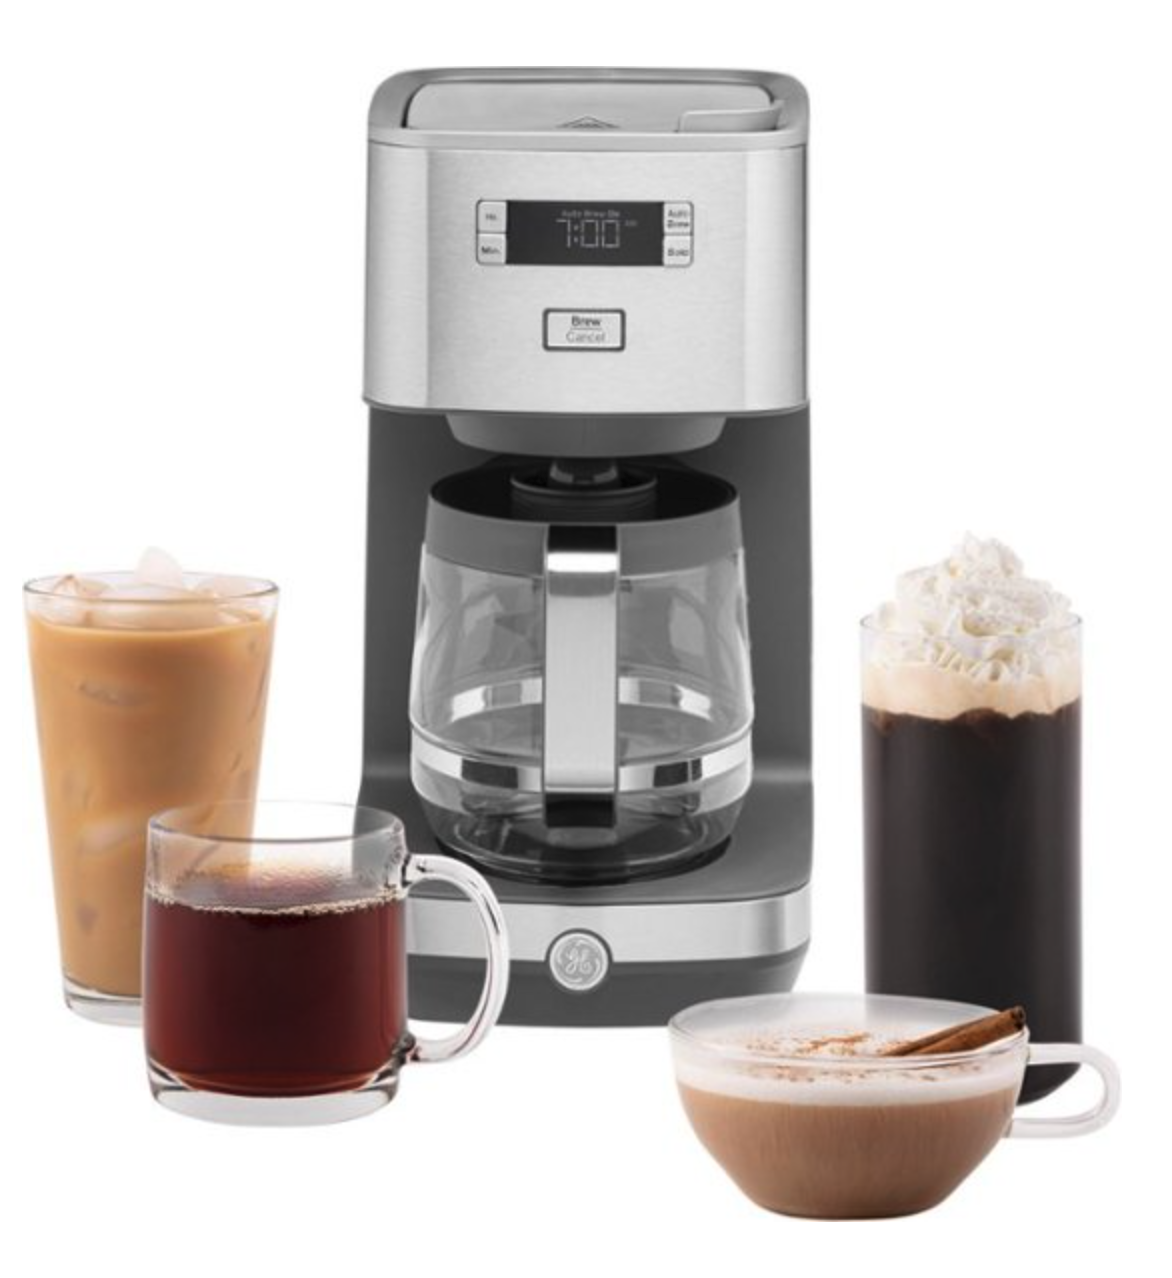 Classic Drip 12-Cup Coffee Maker from GE $30